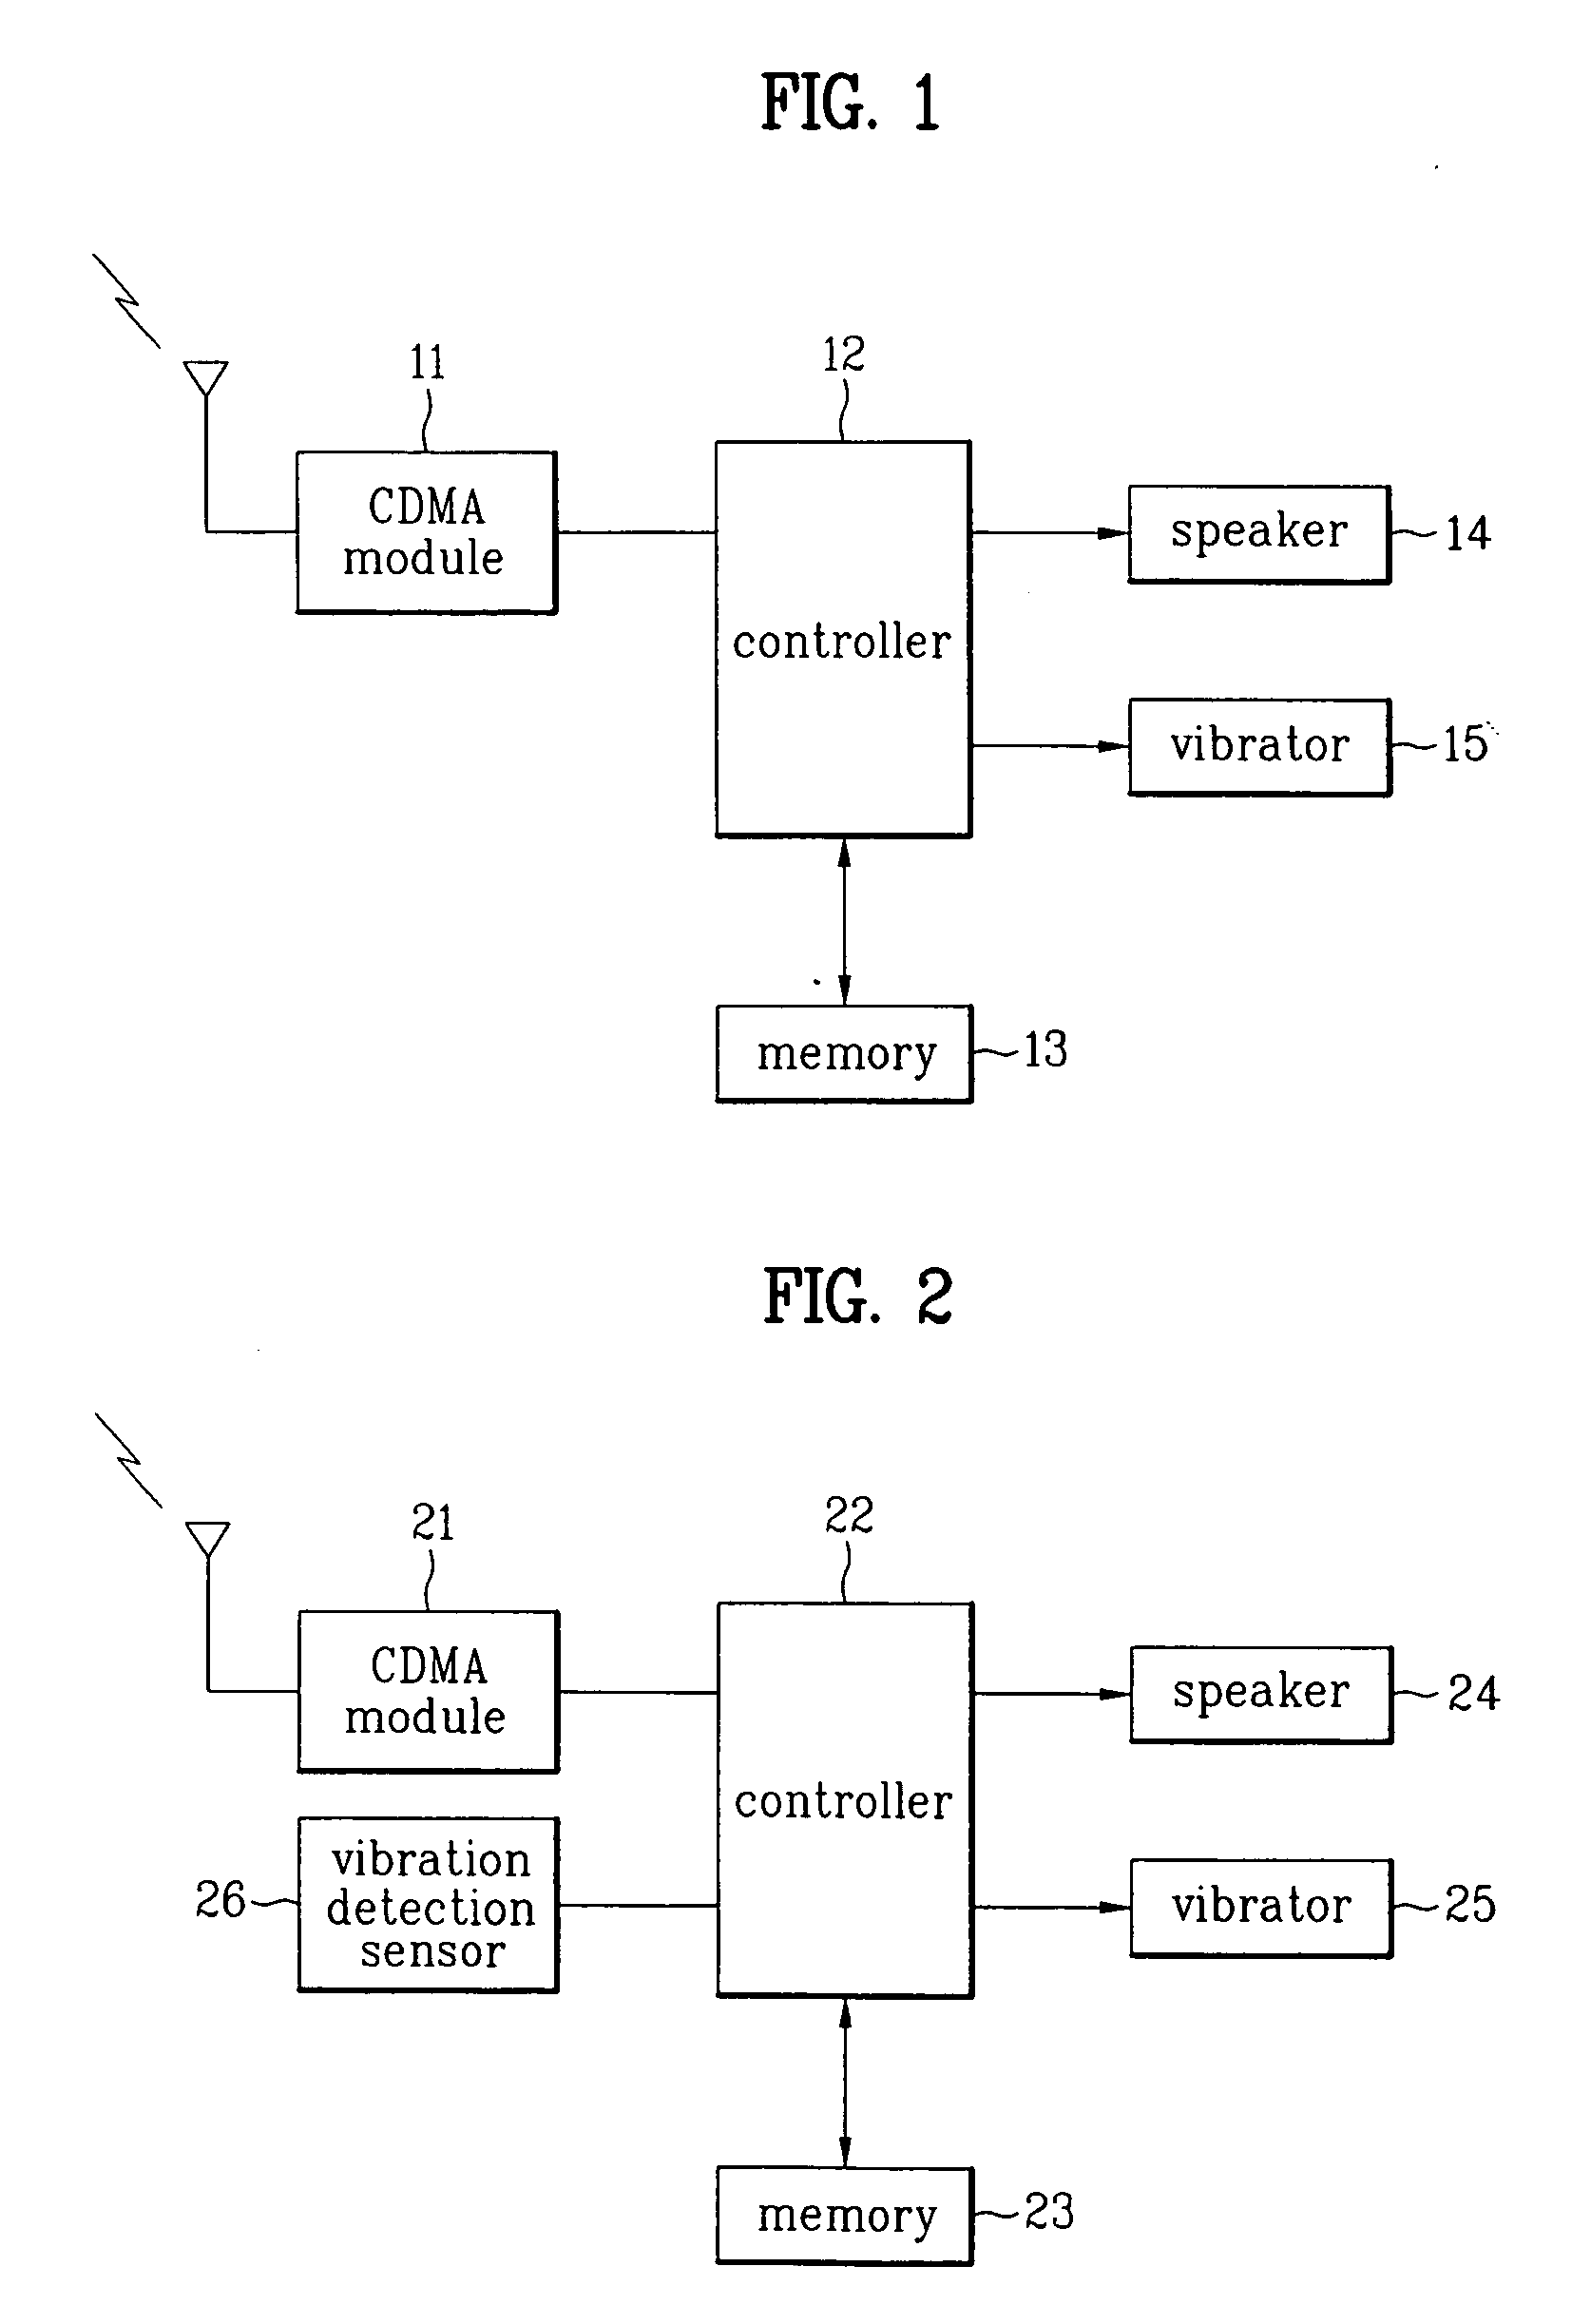 Method for automatically switching incoming call signal output mode from vibration to ringtone using vibration detection unit in mobile communication terminal